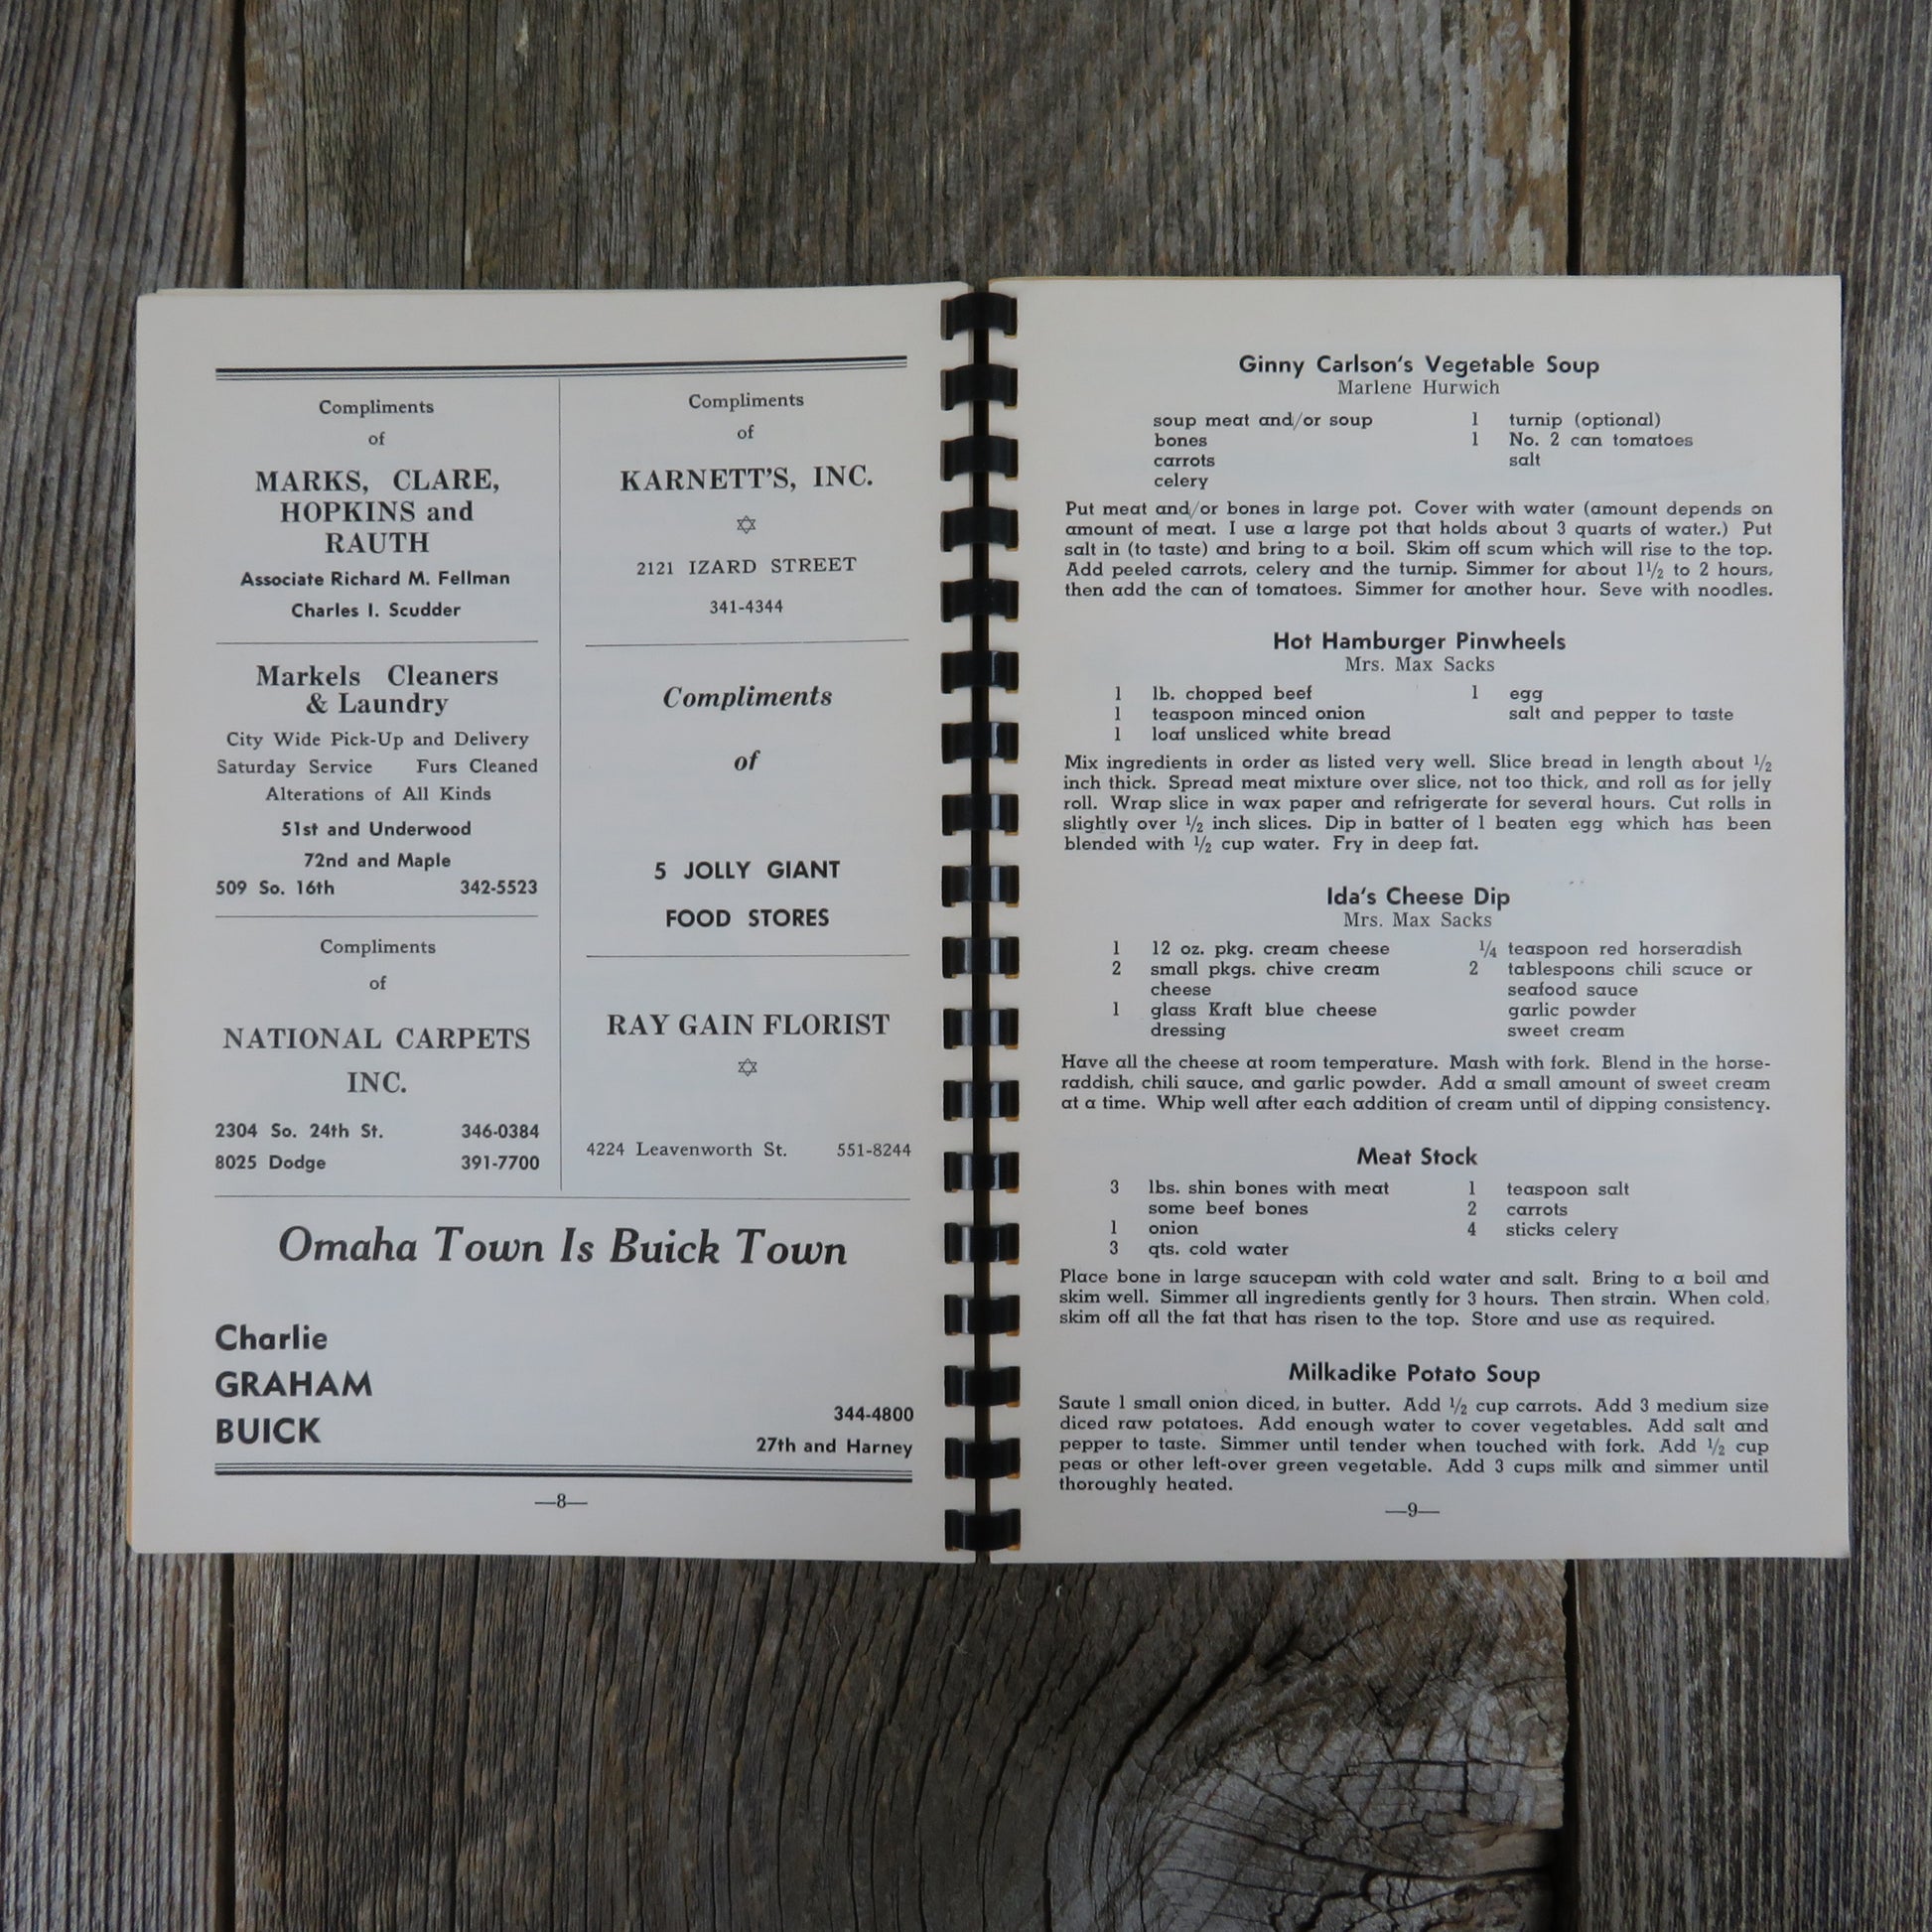 Vintage Nebraska Jewish Cookbook B'nai B'rith Henry Monsky Chapter 470 Eppes Essen Something to Eat 1963 Lithograph Advertisements - At Grandma's Table